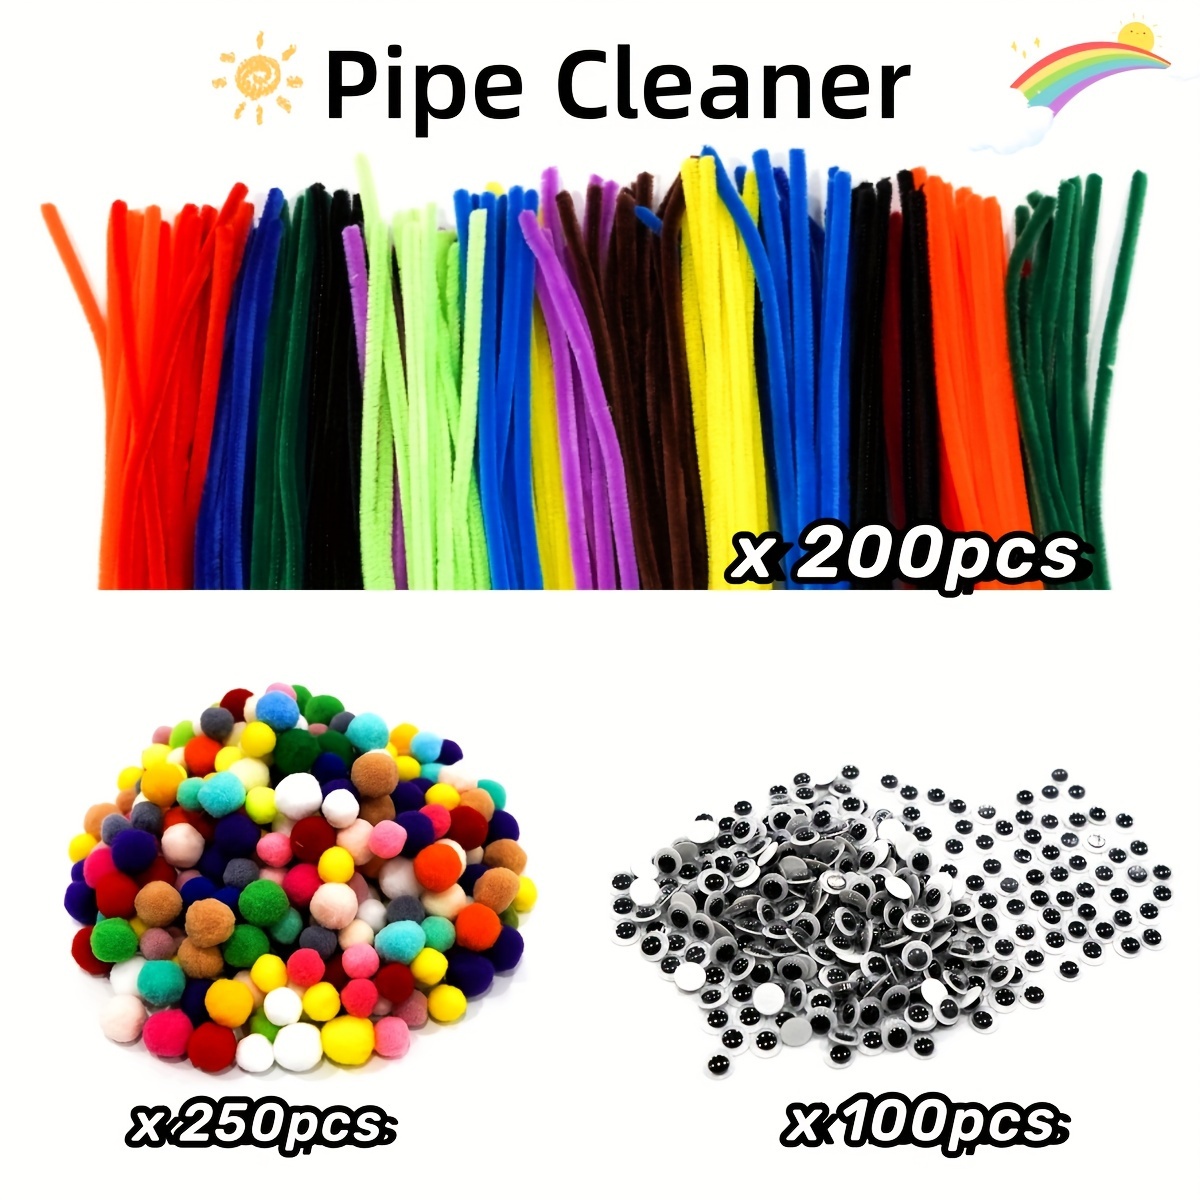 Pipe Cleaner - Craft items - Crafts and stationery - Ikes and Geoffs  Emporium Limited